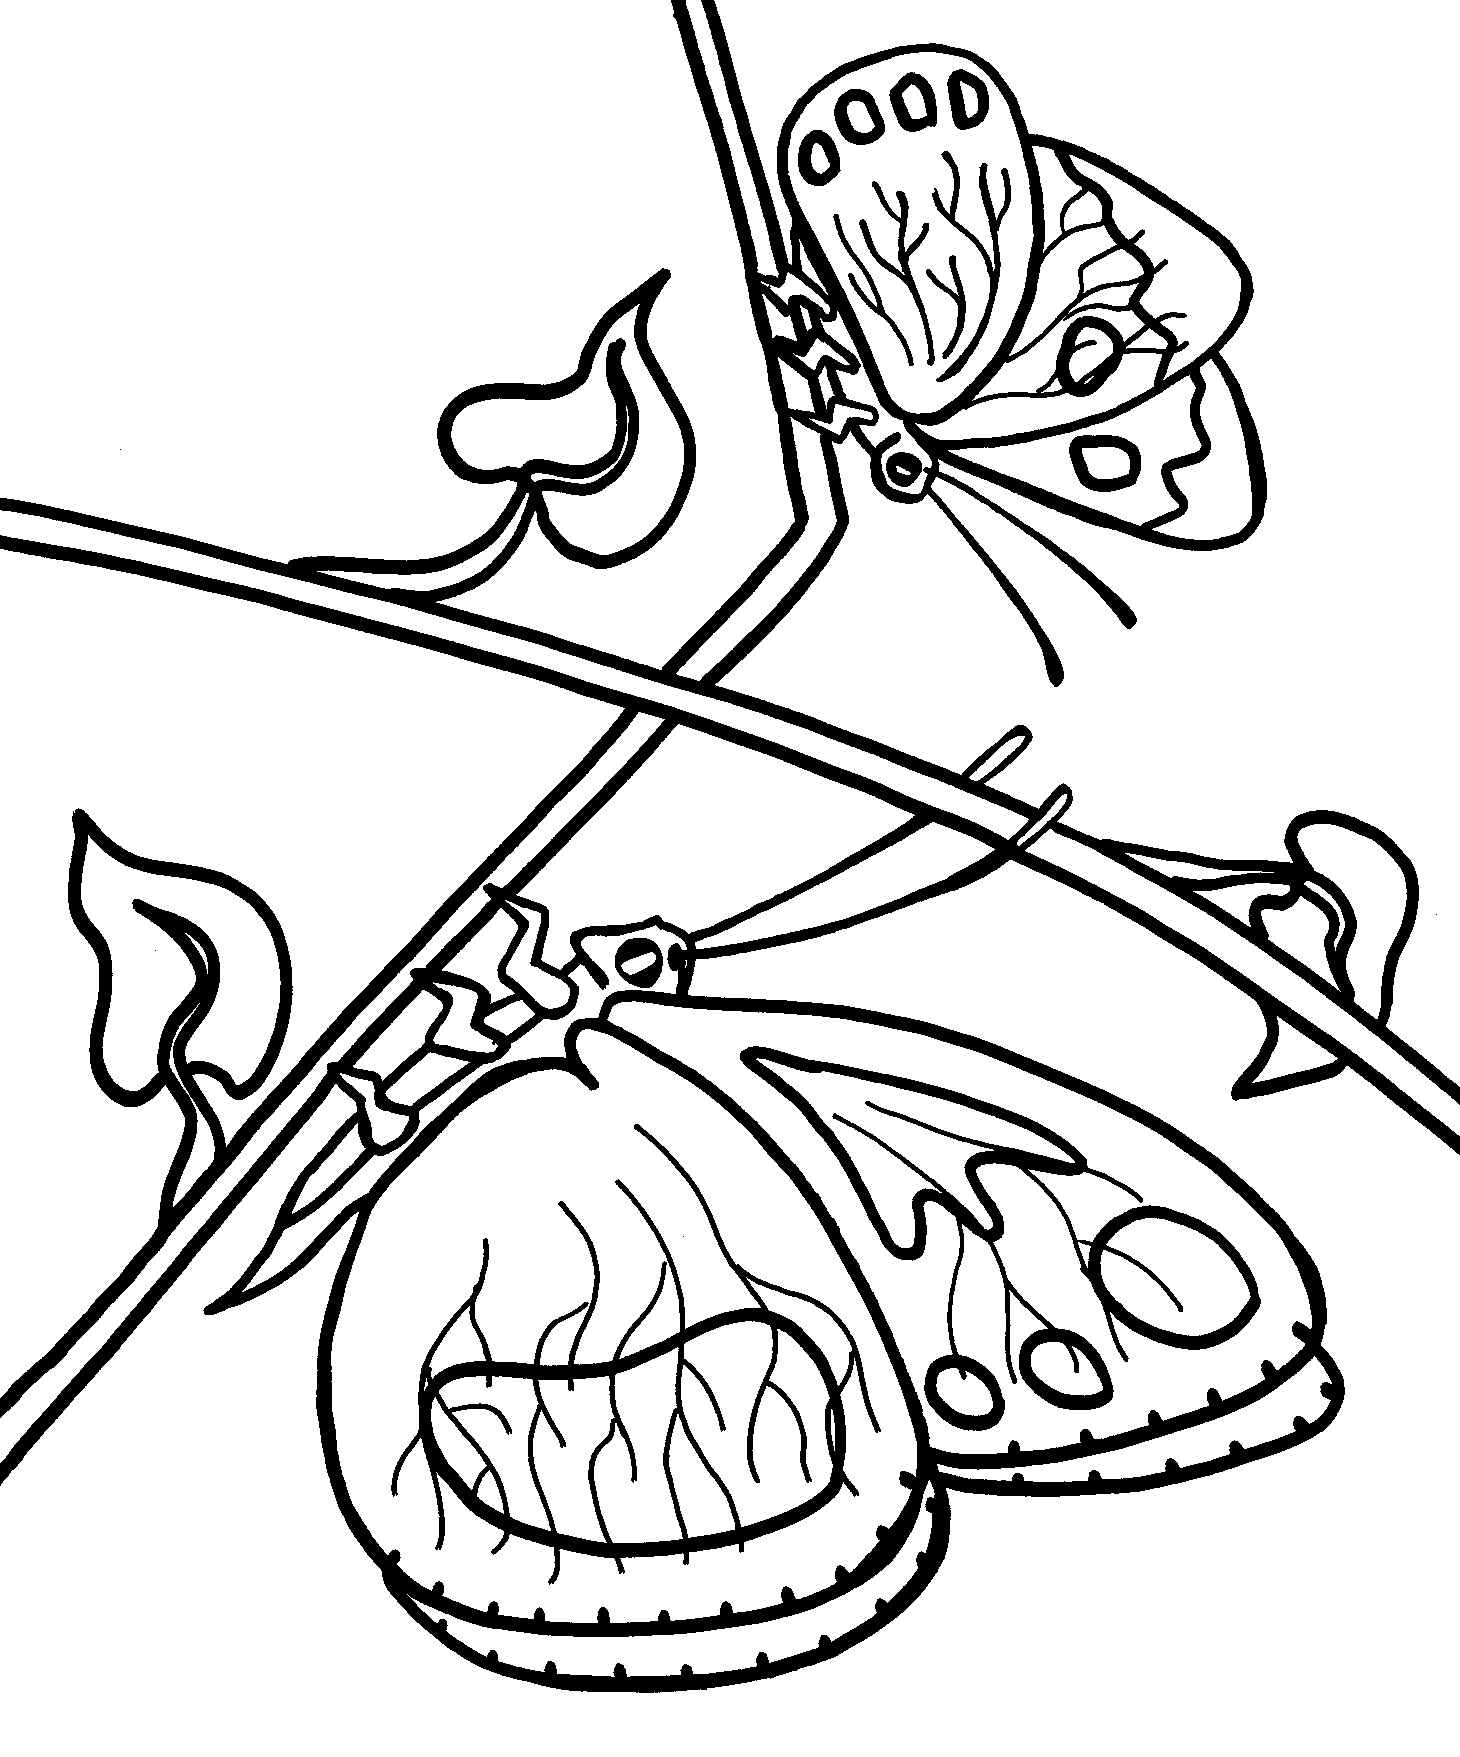 Coloring Pages For Kids Butterflies
 Free Printable Butterfly Coloring Pages For Kids